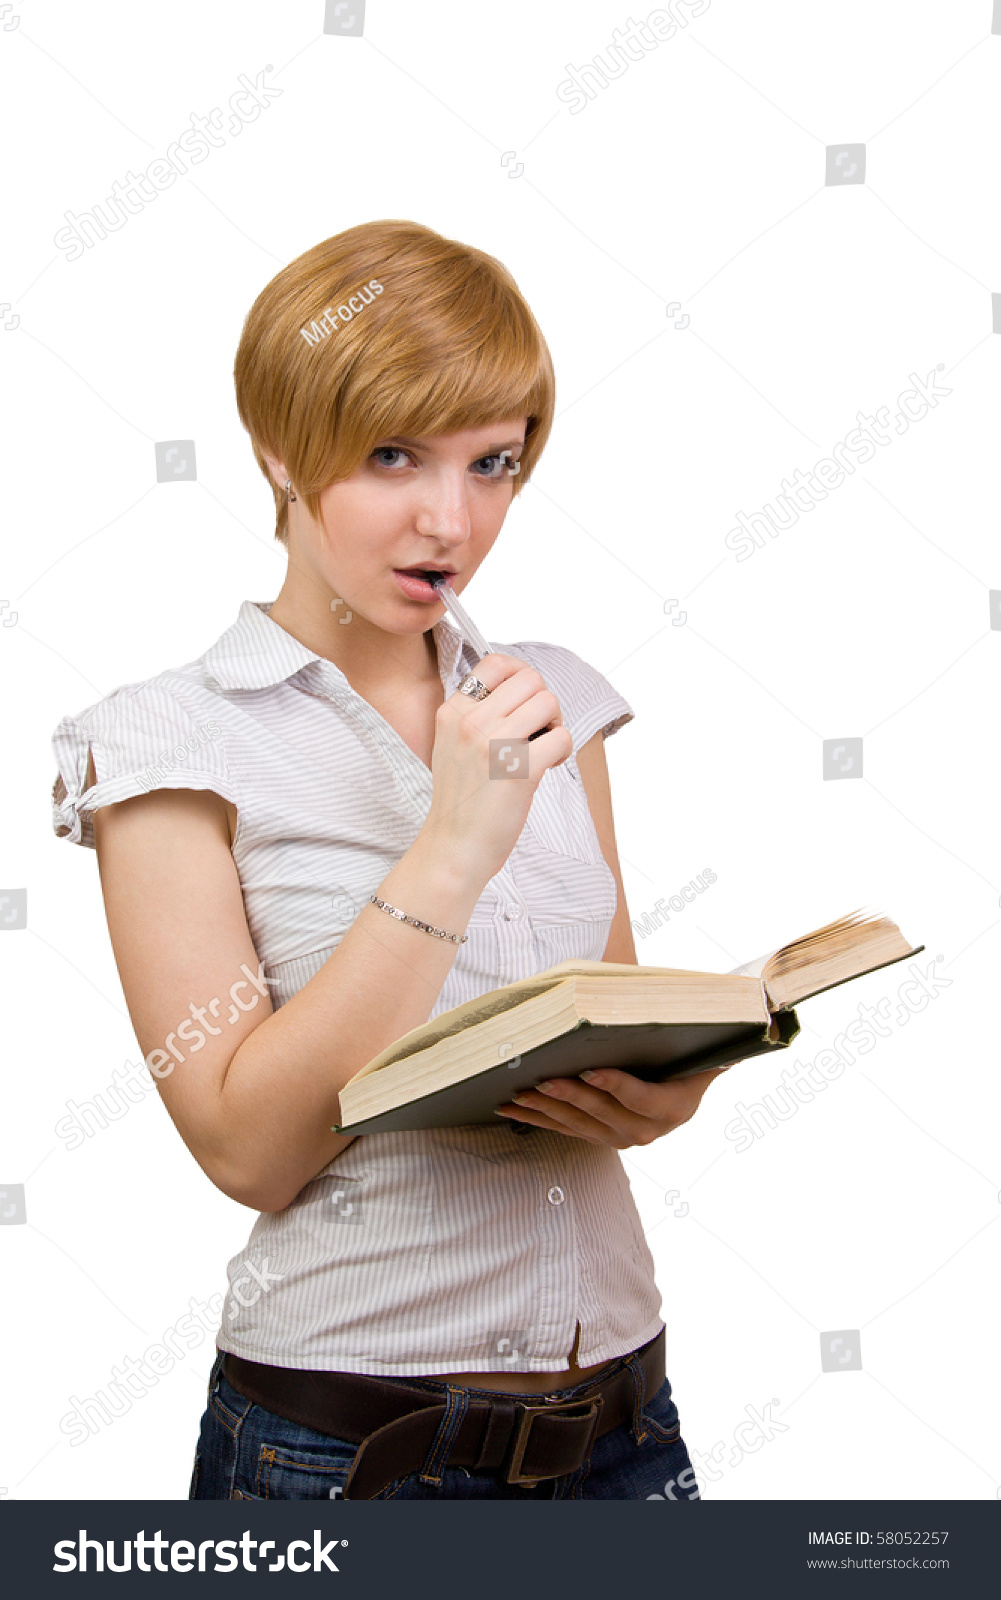 Image result for girl image with pen and book